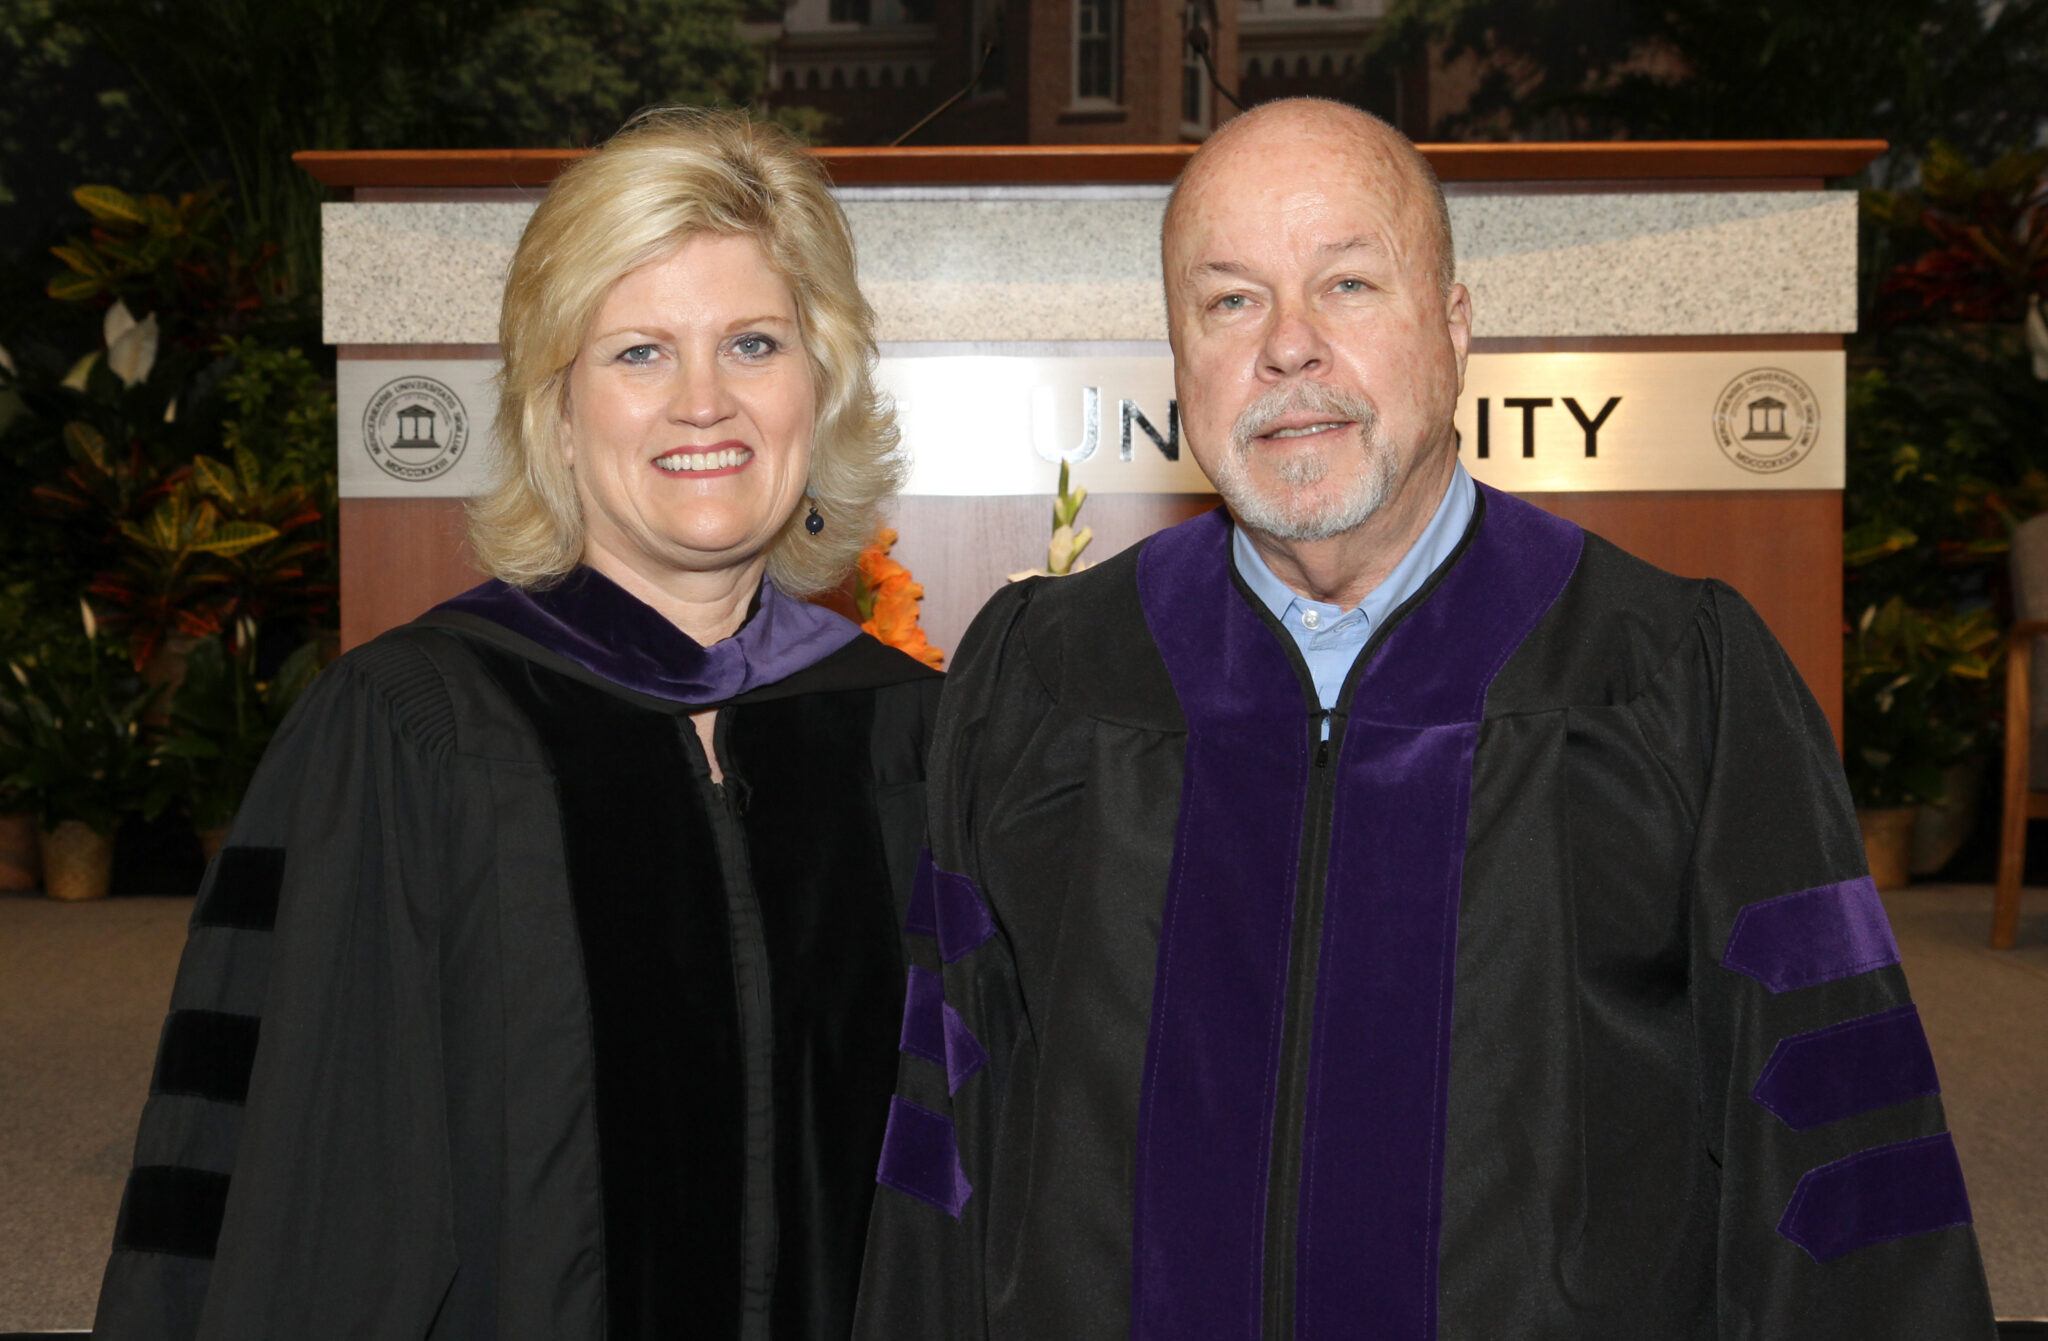 Marilyn Sutton and George Phillips pose together in law school graduation regalia